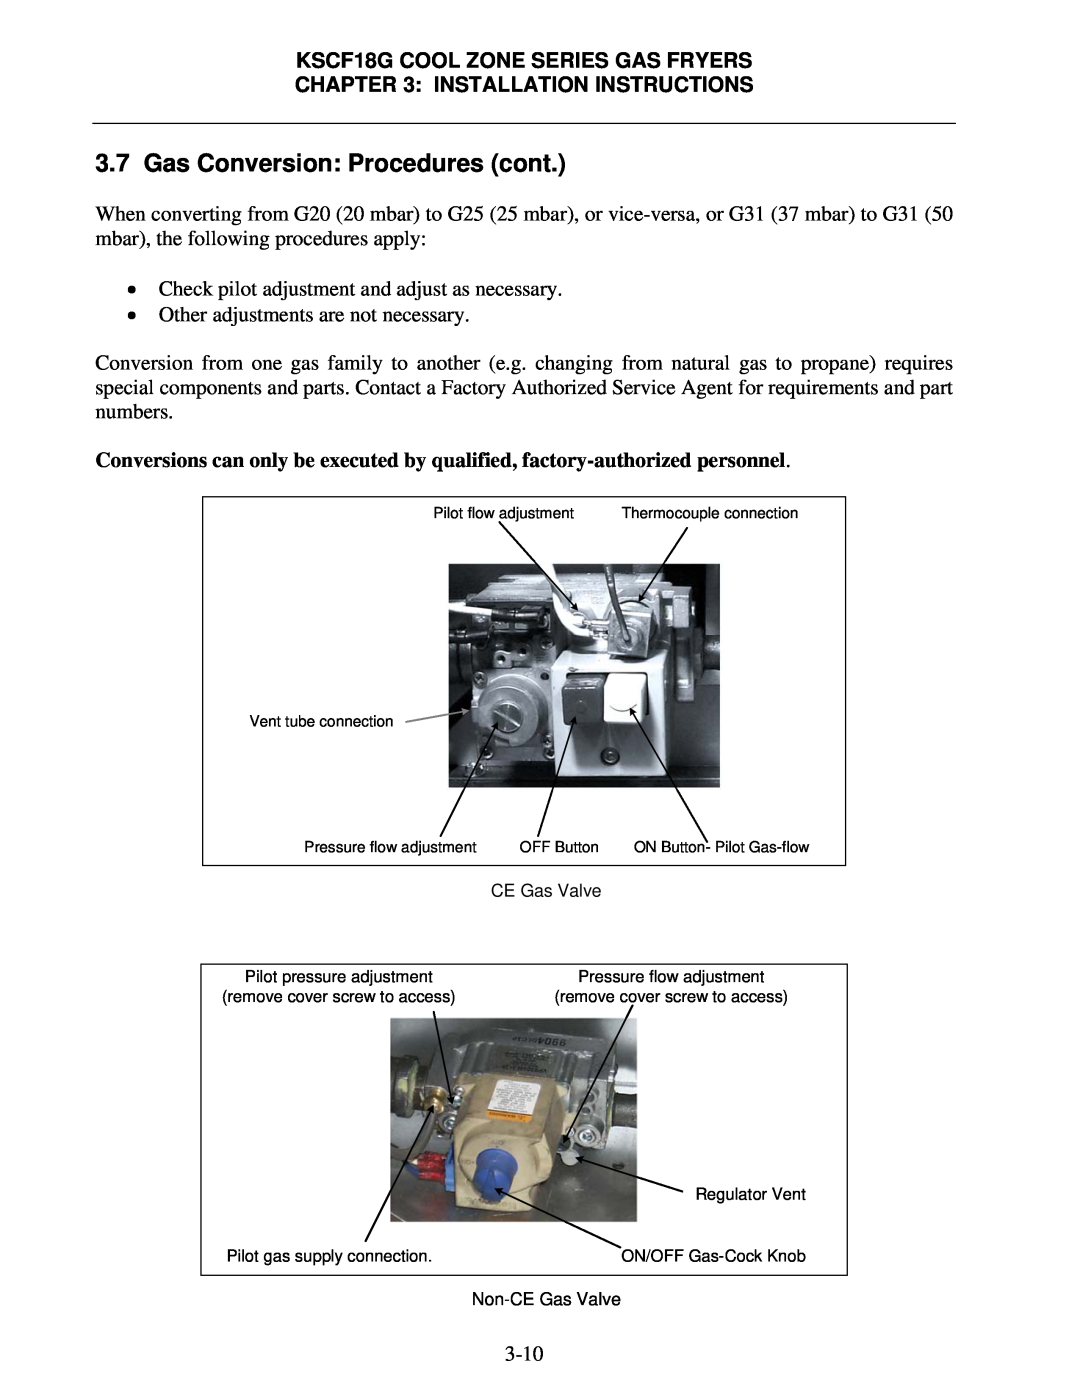 Frymaster manual Gas Conversion: Procedures cont, KSCF18G COOL ZONE SERIES GAS FRYERS, Installation Instructions 